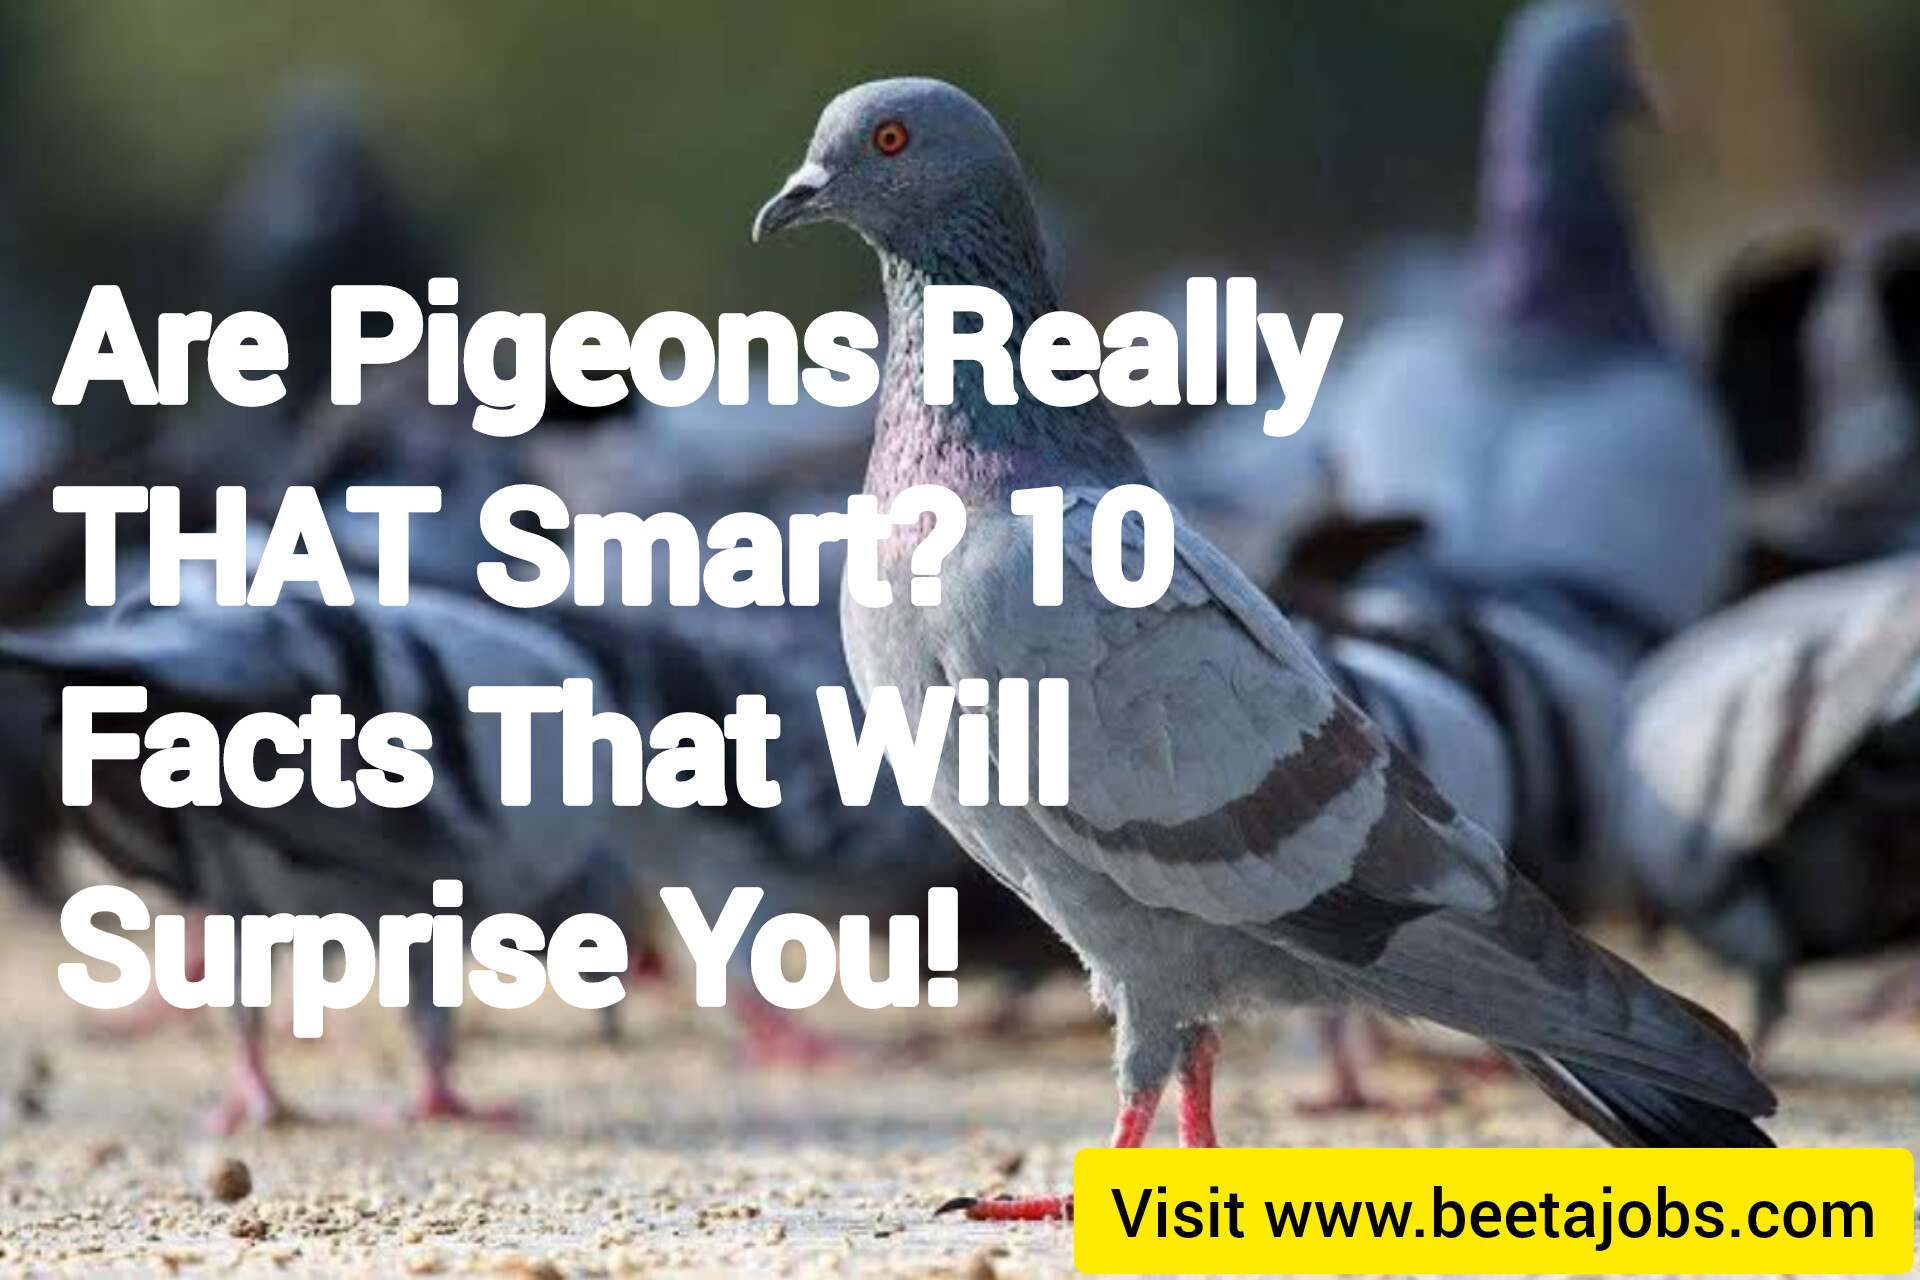 Are Pigeons Really THAT Smart? 10 Facts That Will Surprise You!